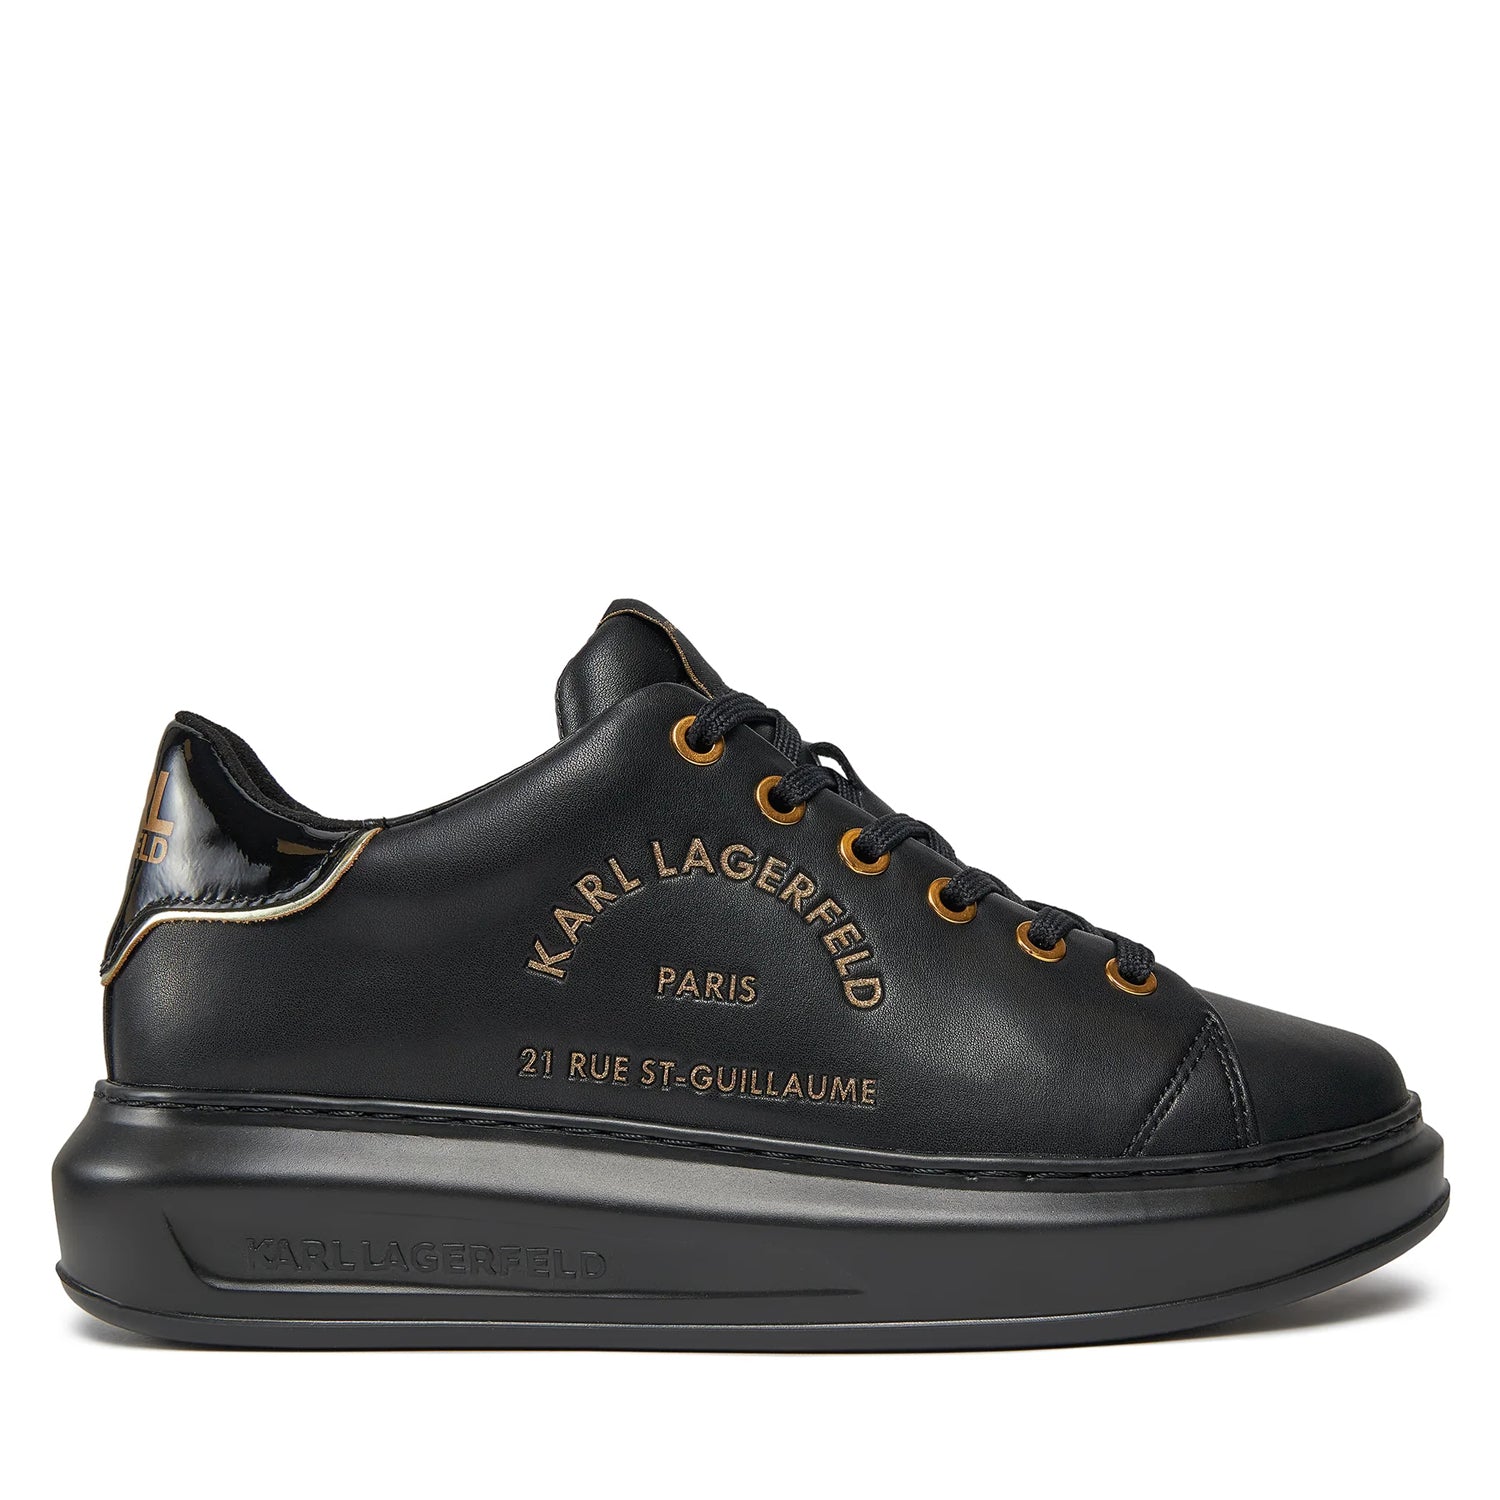 Karl Lagerfeld Sapatilhas Sneakers Shoes Kl62539f Blk Gold Preto Ouro_shot1